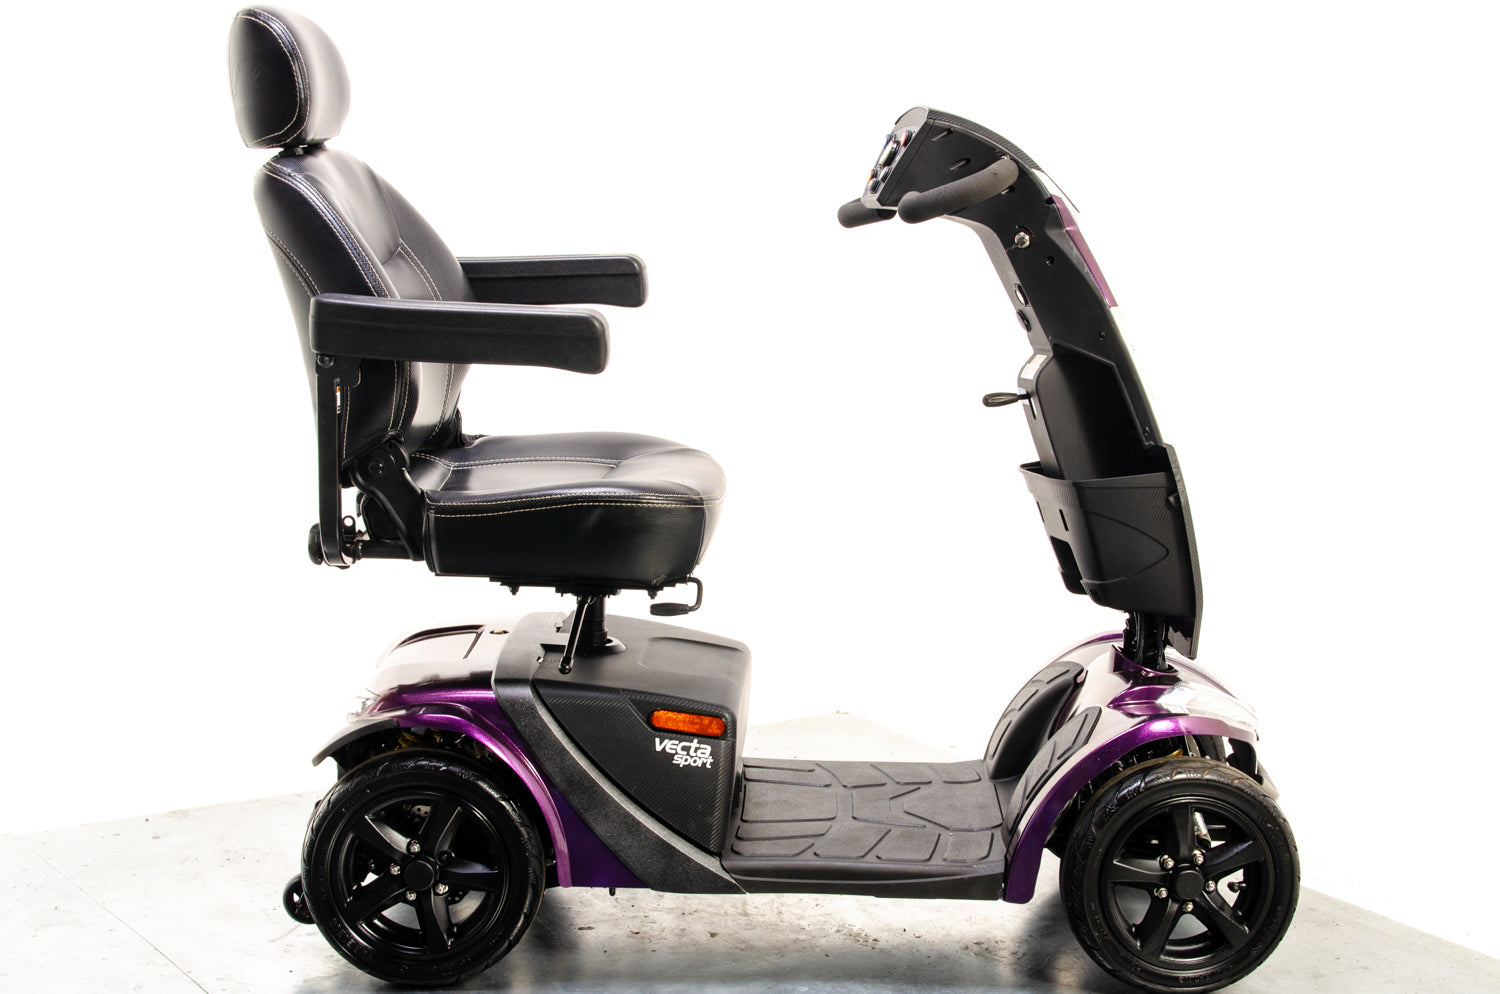 Rascal Vecta Sport Compact Used Electric Mobility Scooter 8mph Max Grip Suspension All-Terrain Road Legal Purple Sparkle 13317